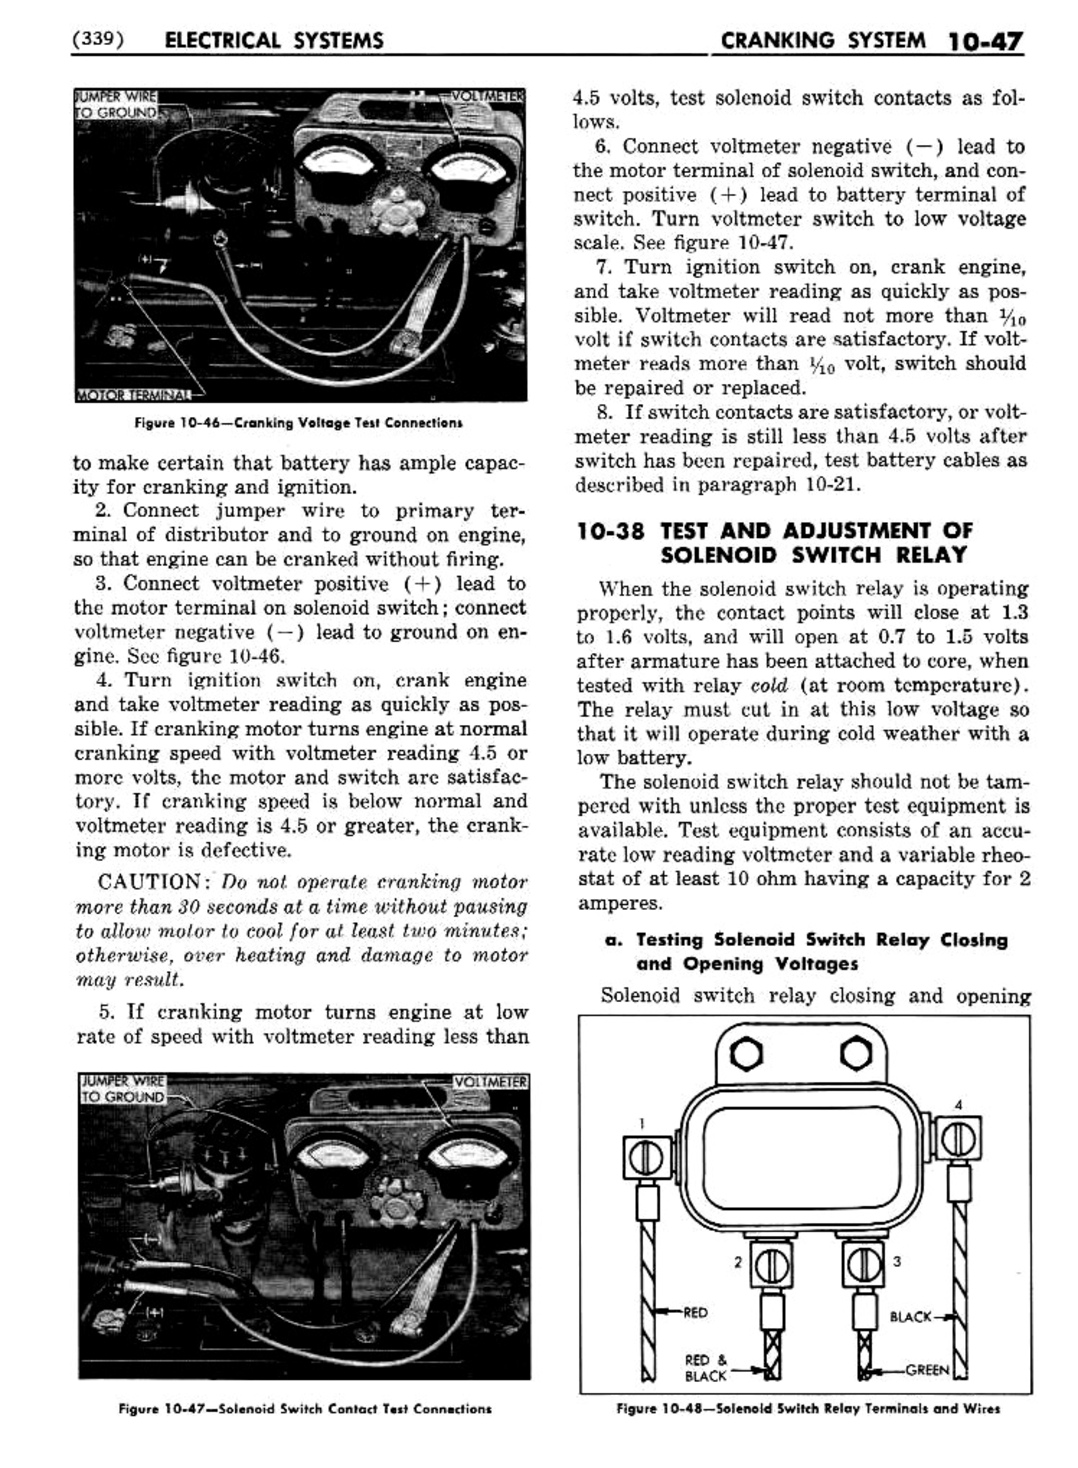 n_11 1951 Buick Shop Manual - Electrical Systems-047-047.jpg